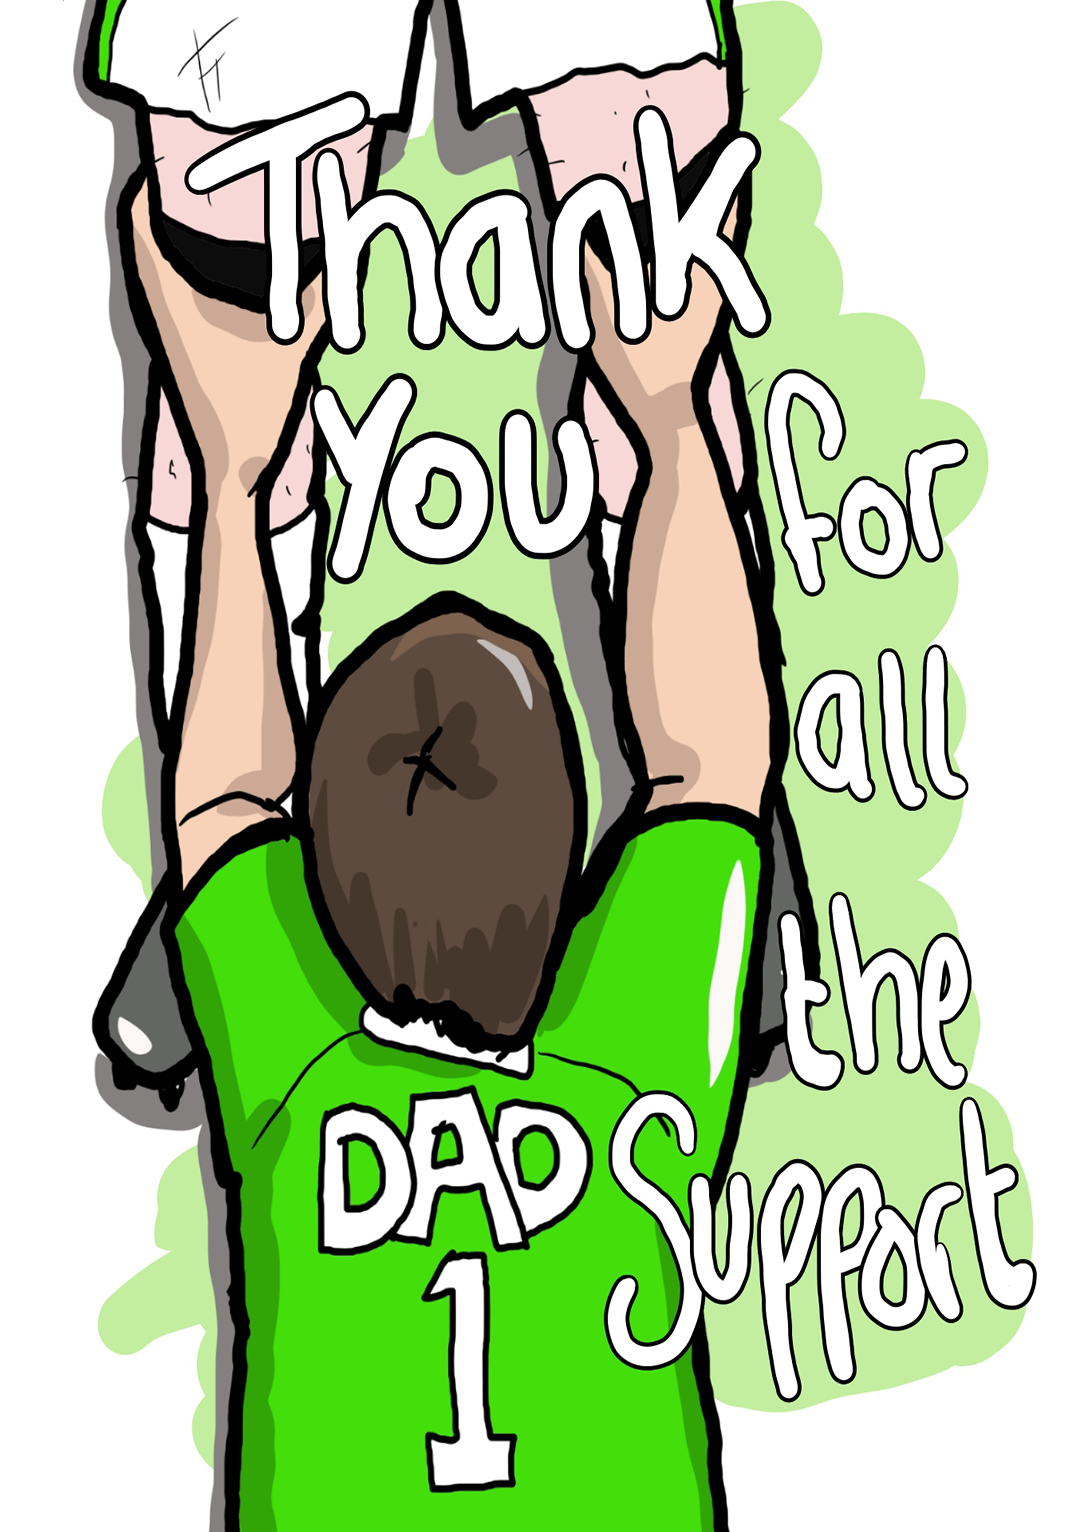 Thank You For All The Support - Father's Day Card